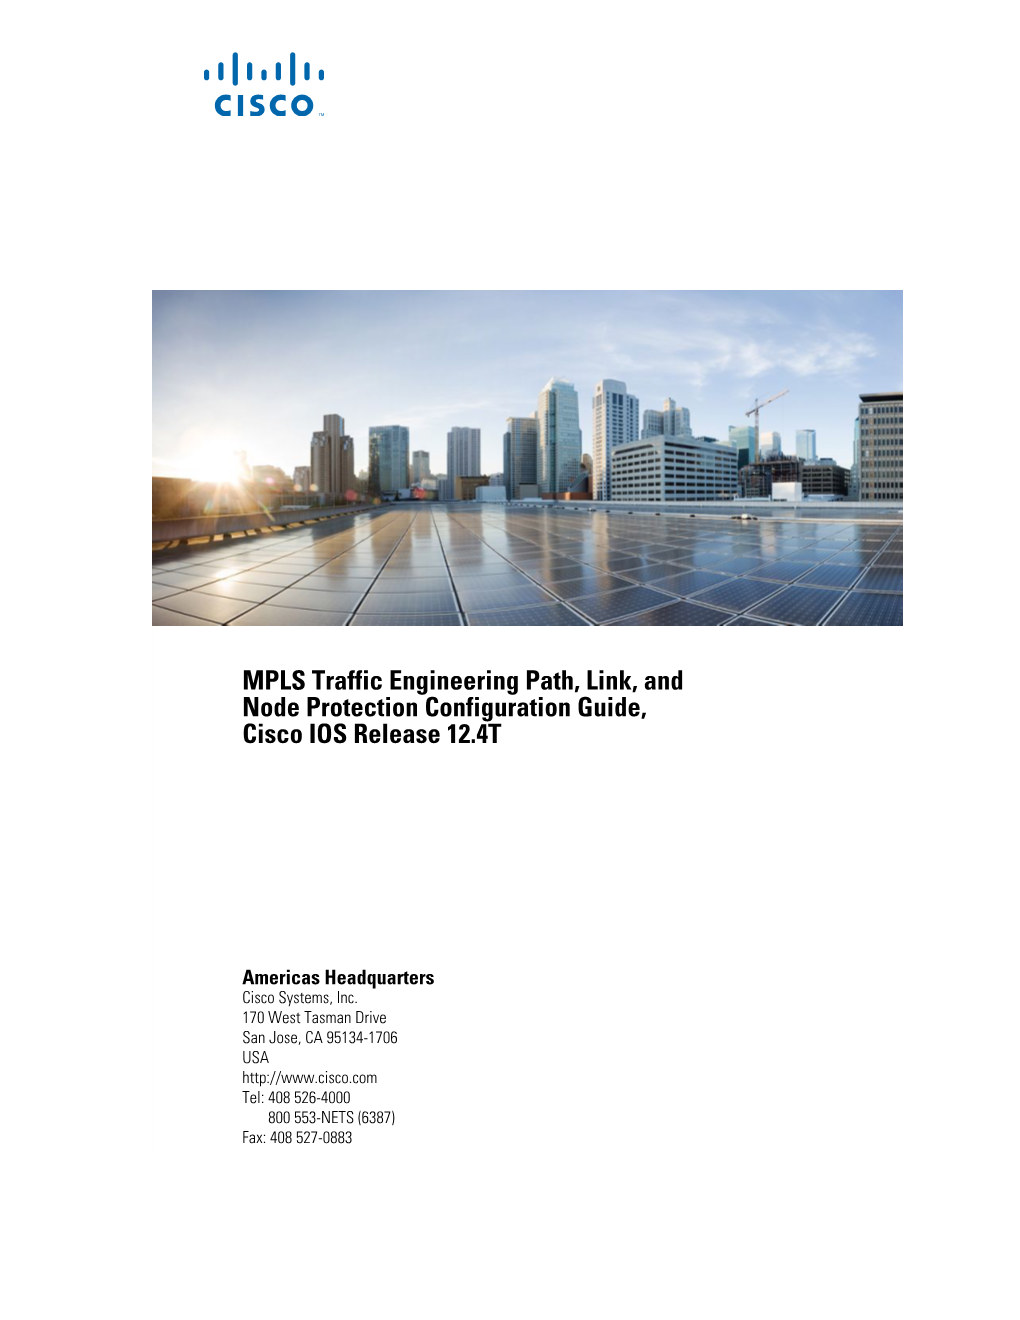 MPLS Traffic Engineering Path, Link, and Node Protection Configuration Guide, Cisco IOS Release 12.4T